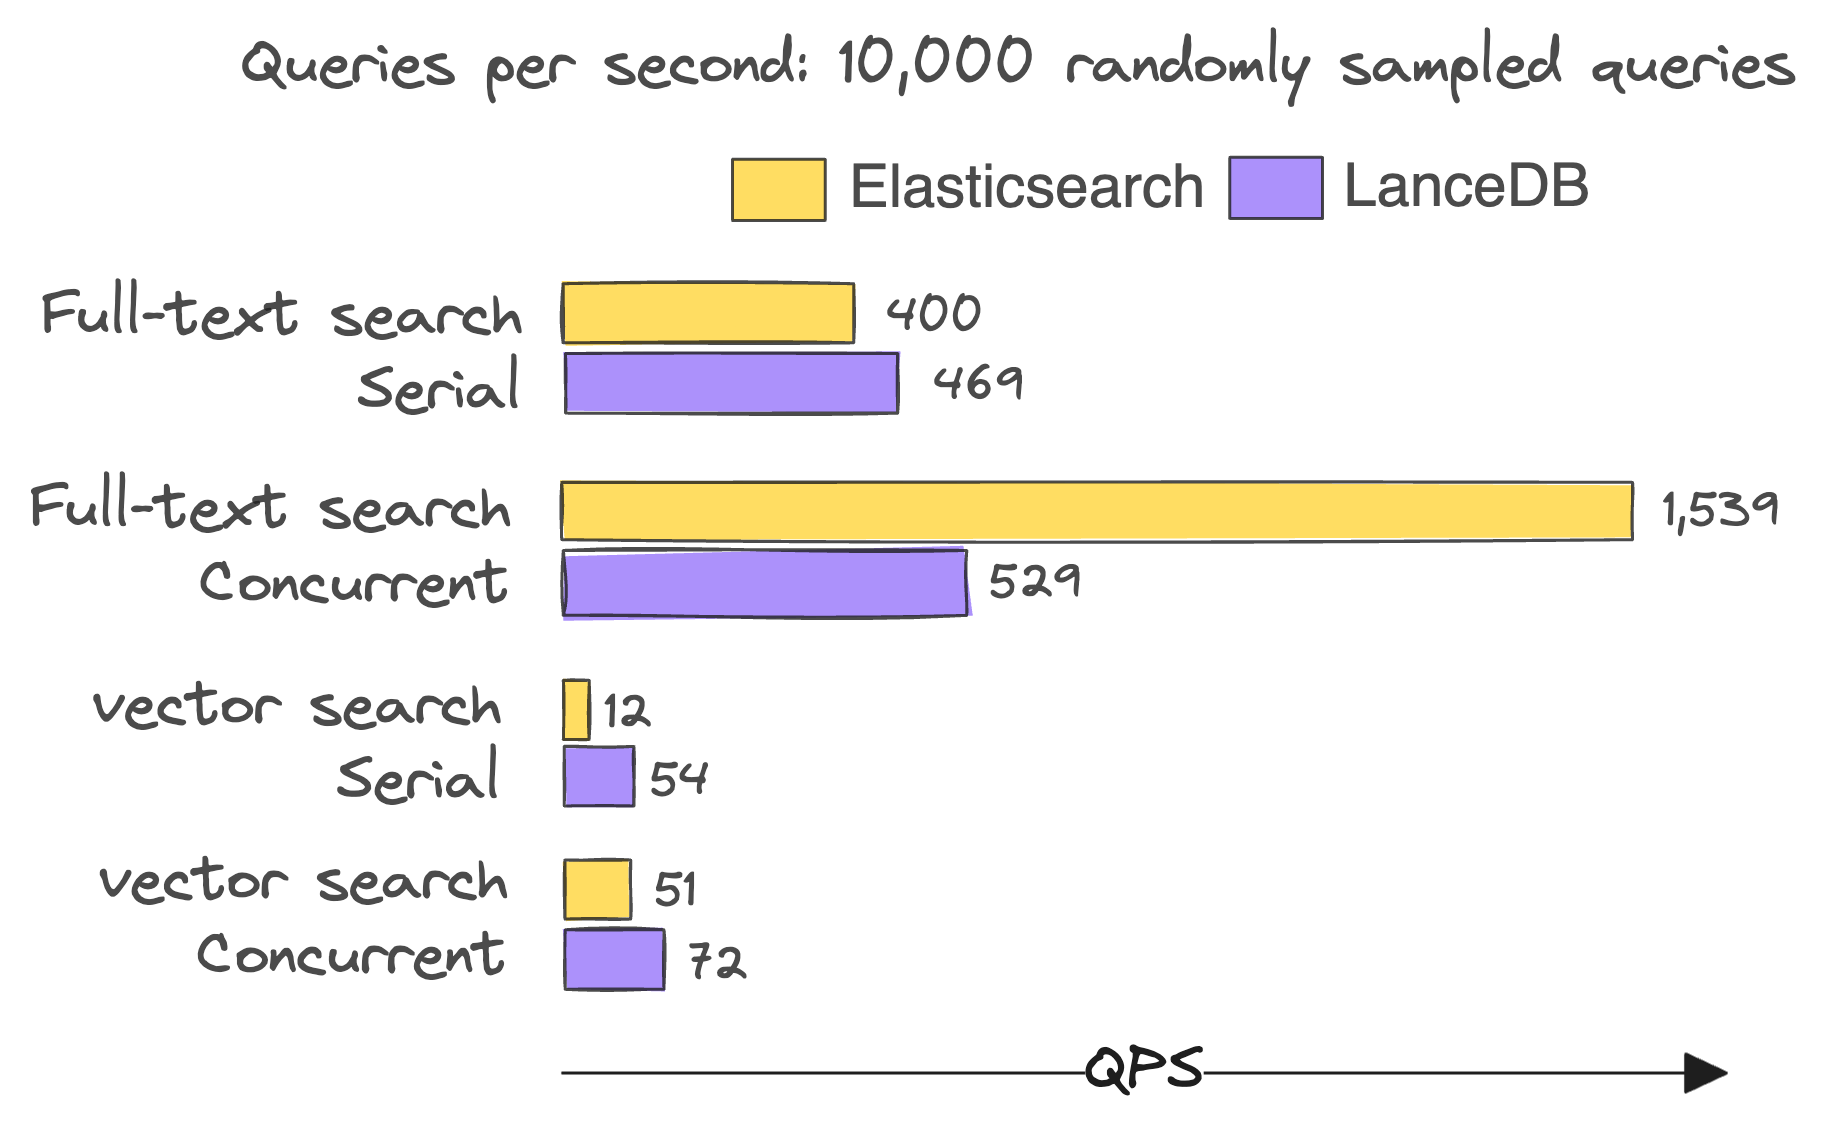 QPS for 10,000 randomly sampled FTS and vector search queries